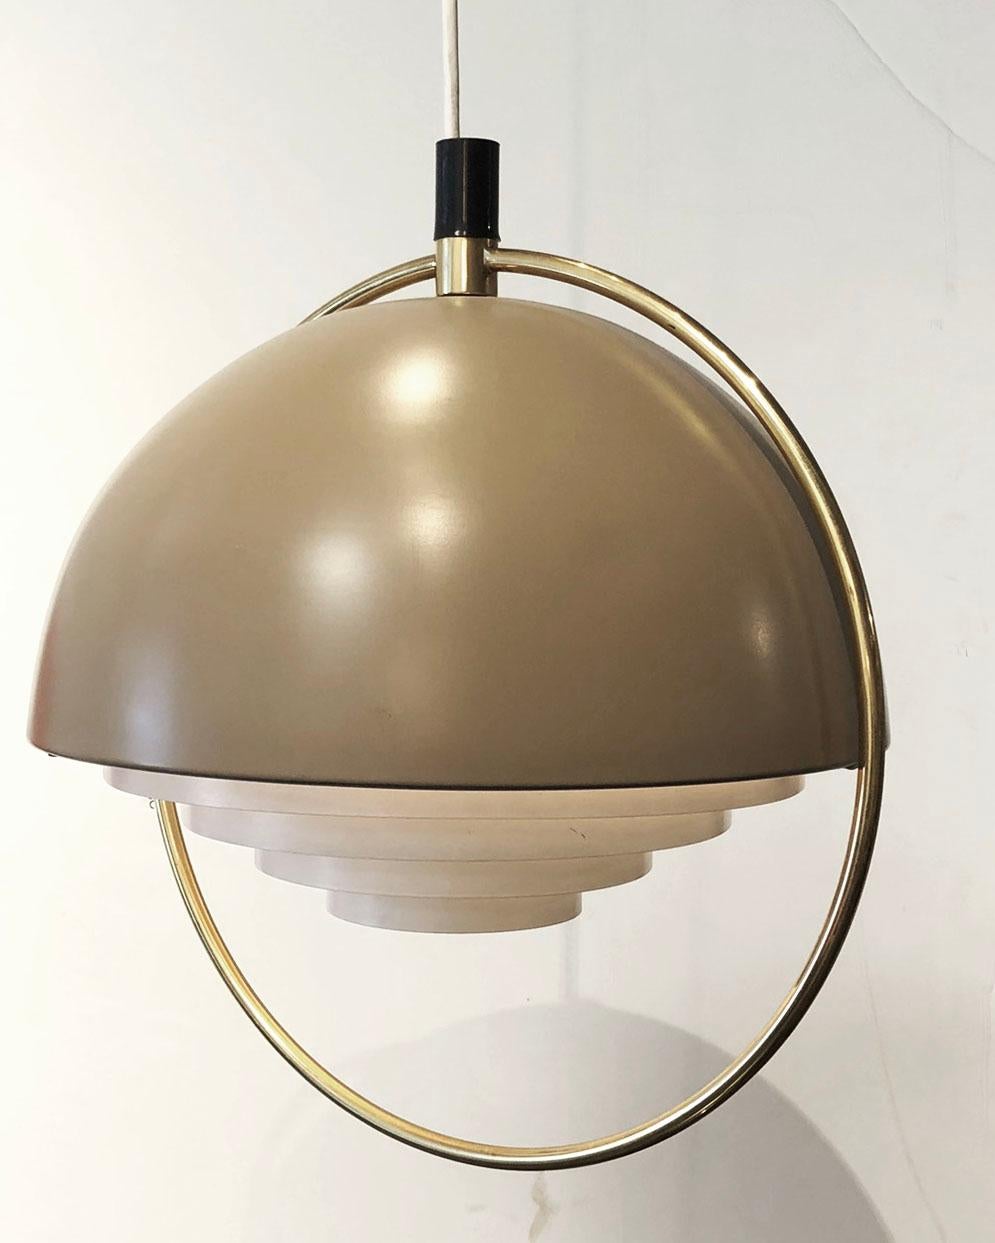 Danish modern hanging light. This is an original Mid-Century Modern design. The design disperses light evenly.   
  

Complementary delivery in the Los Angeles / Beverly Hills area. Pick up is also an option.